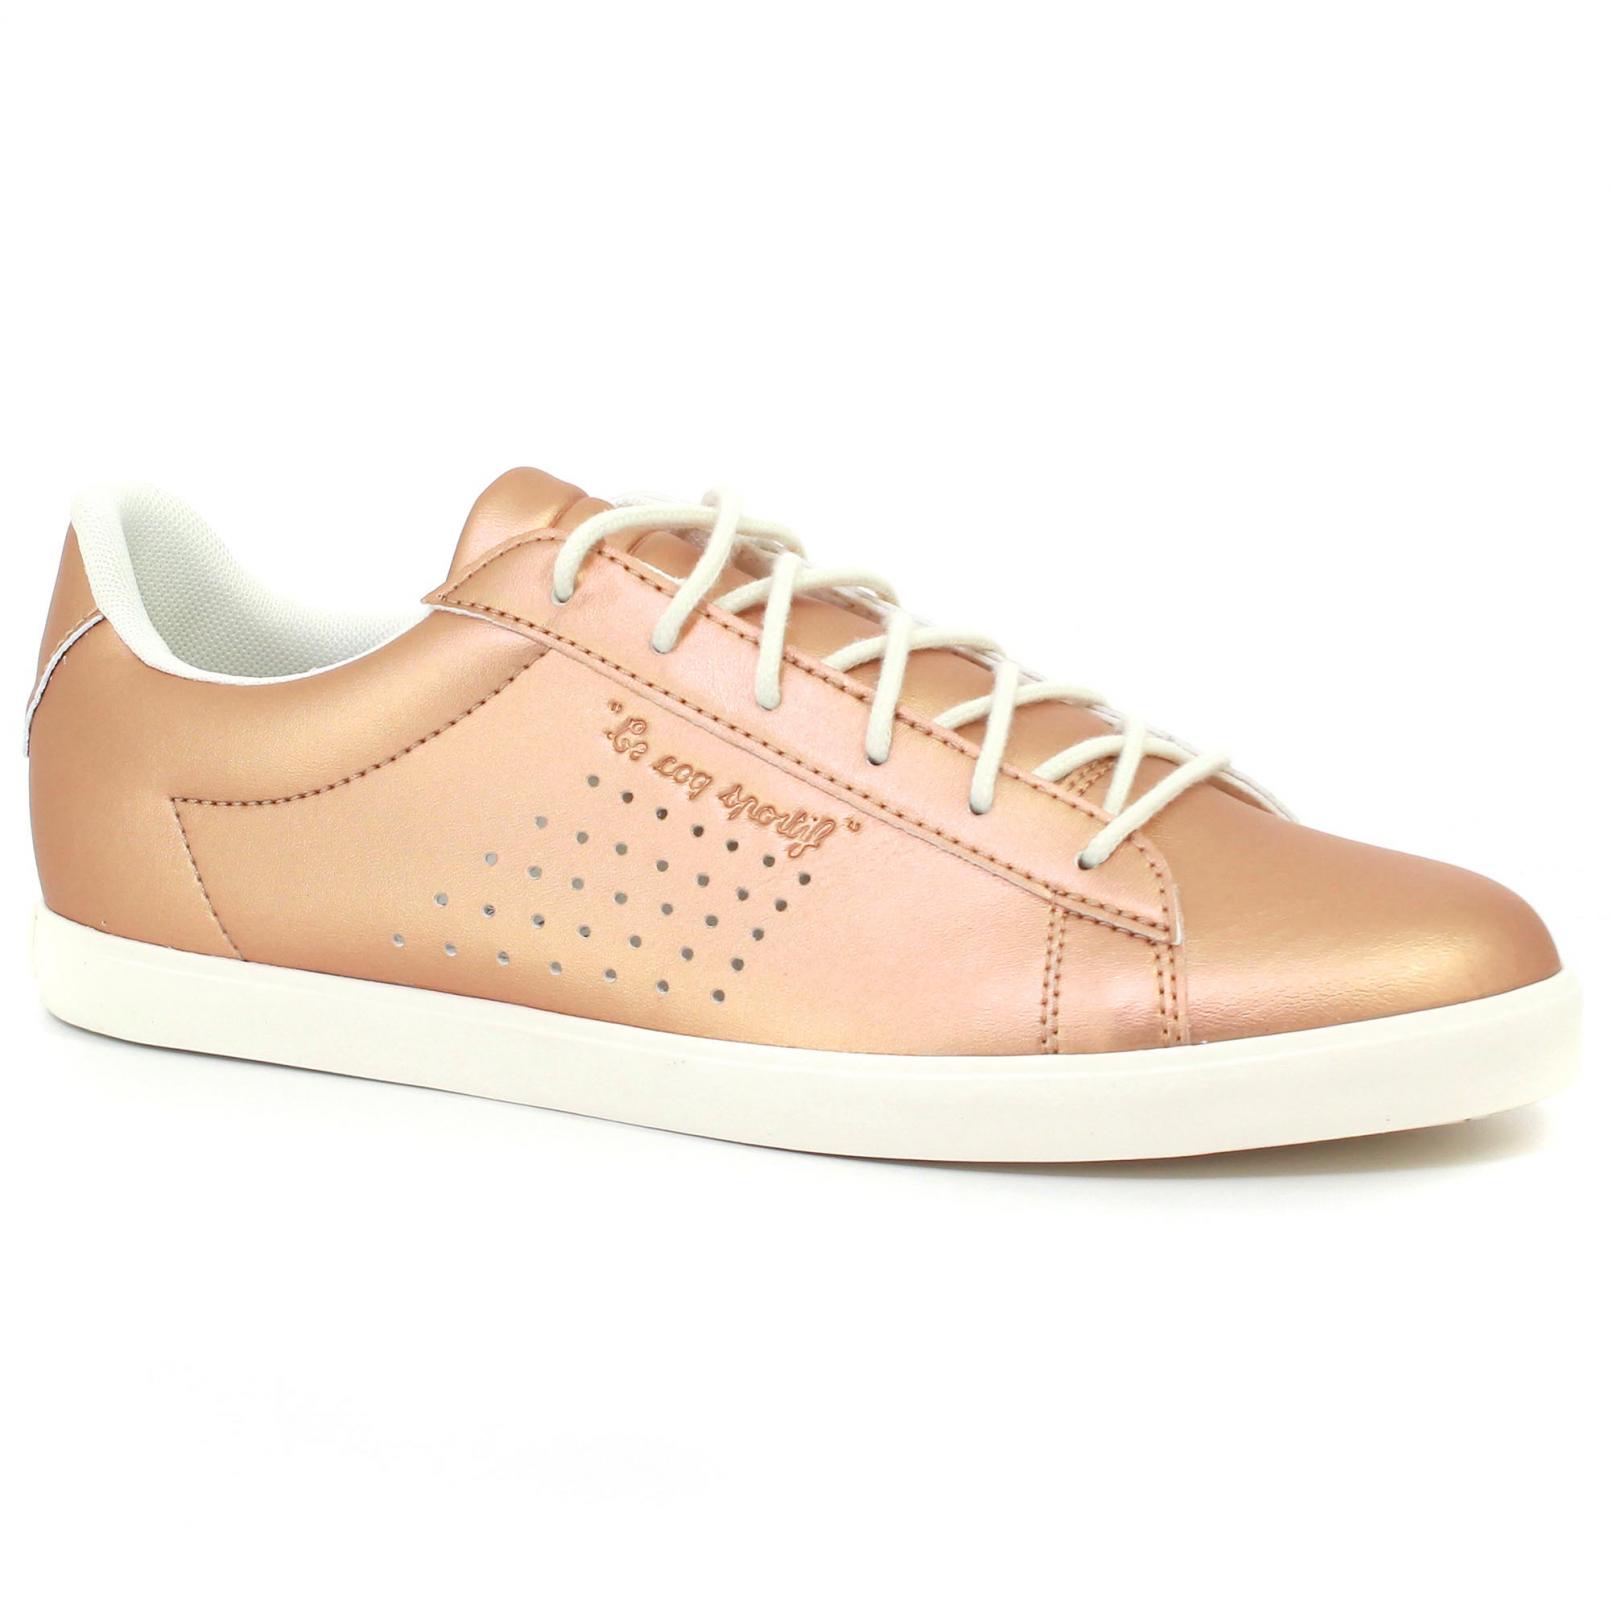 Shoes – Le Coq Sportif Agate Lo Pearlized Pink/Pink